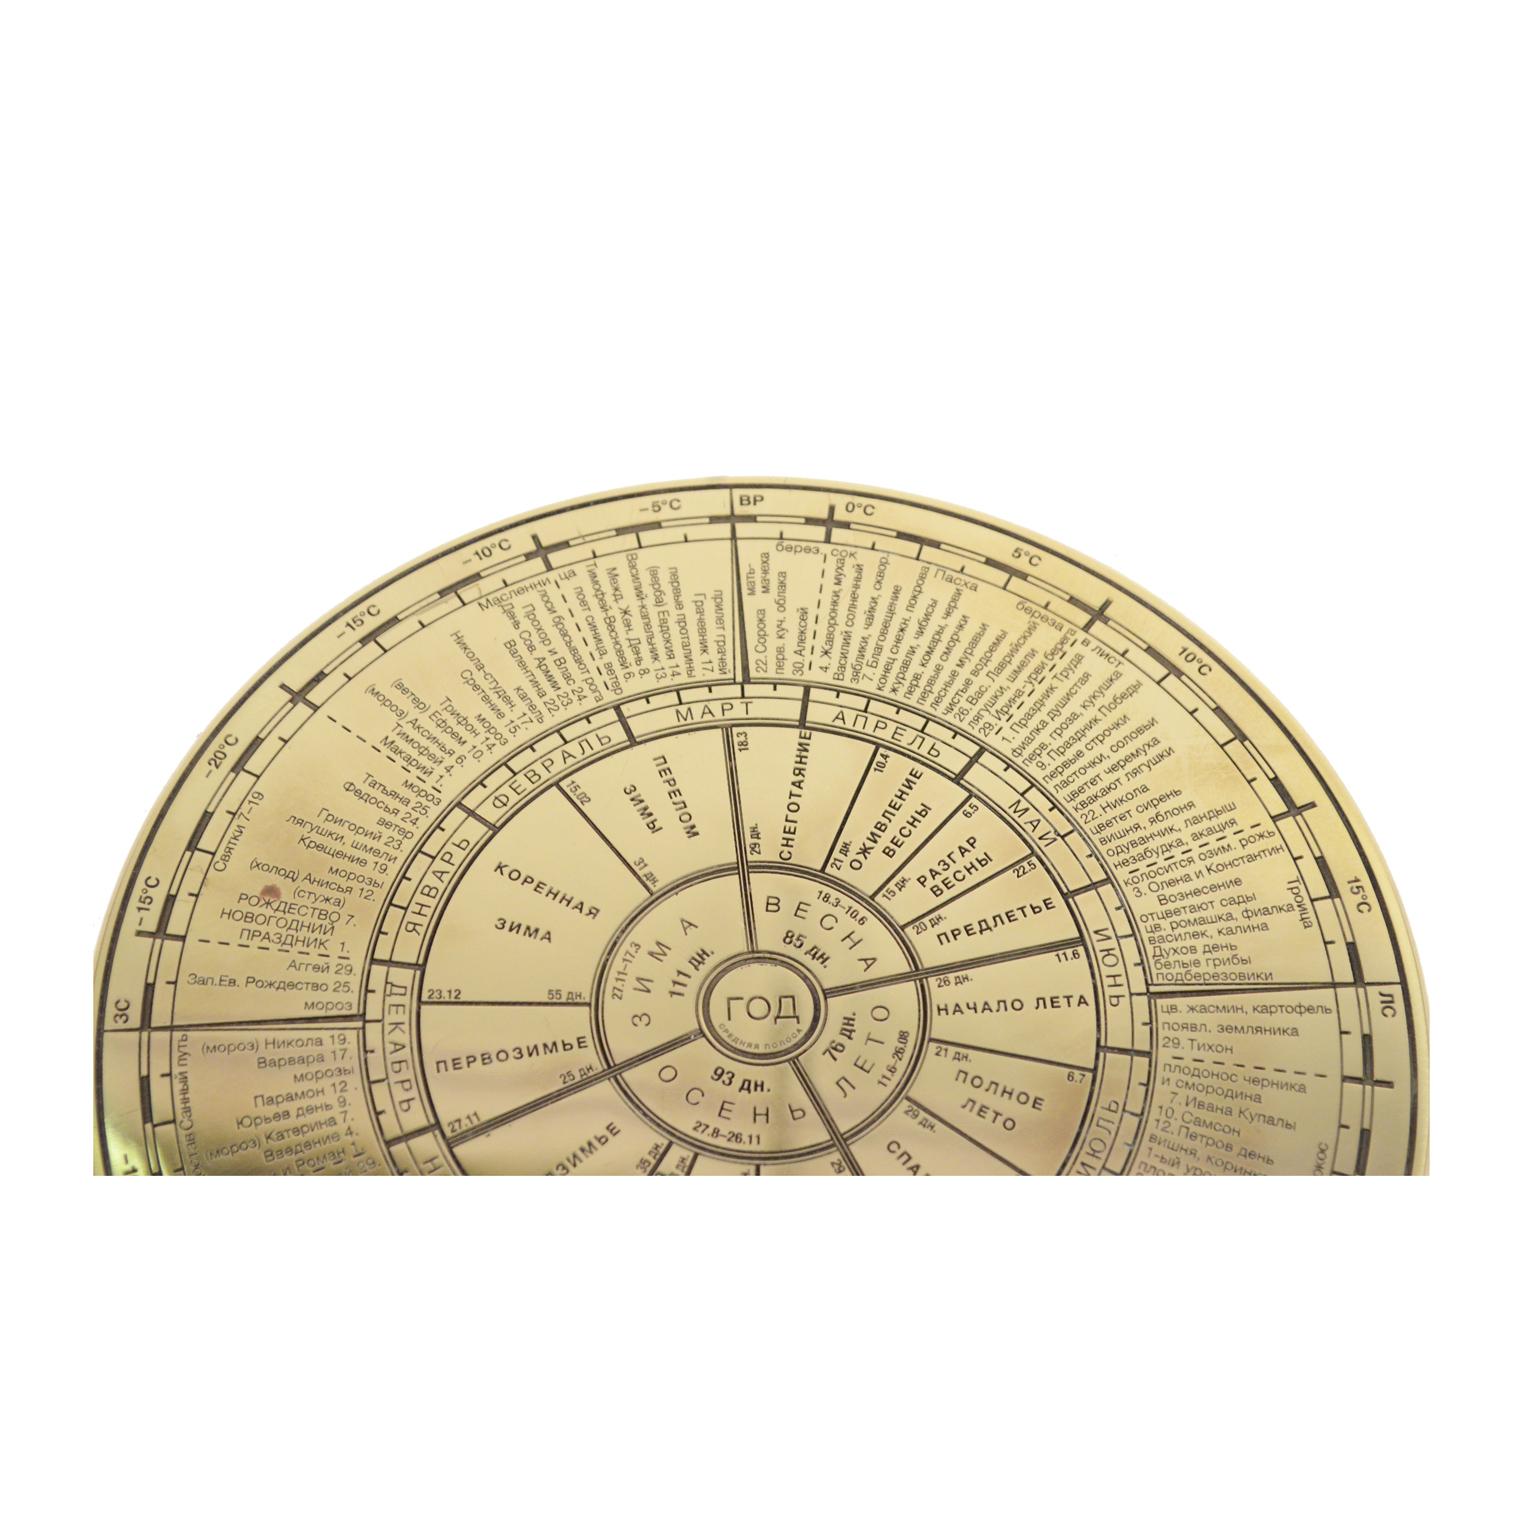 Russian engraved brass perpetual calendar, made in the 1950s. The months, seasons and all holidays of the Russian calendar are indicated. Diameter 18.5 cm, thickness 0.8 cm.
Shipping insured by Lloyd's London; it is available our free gift box